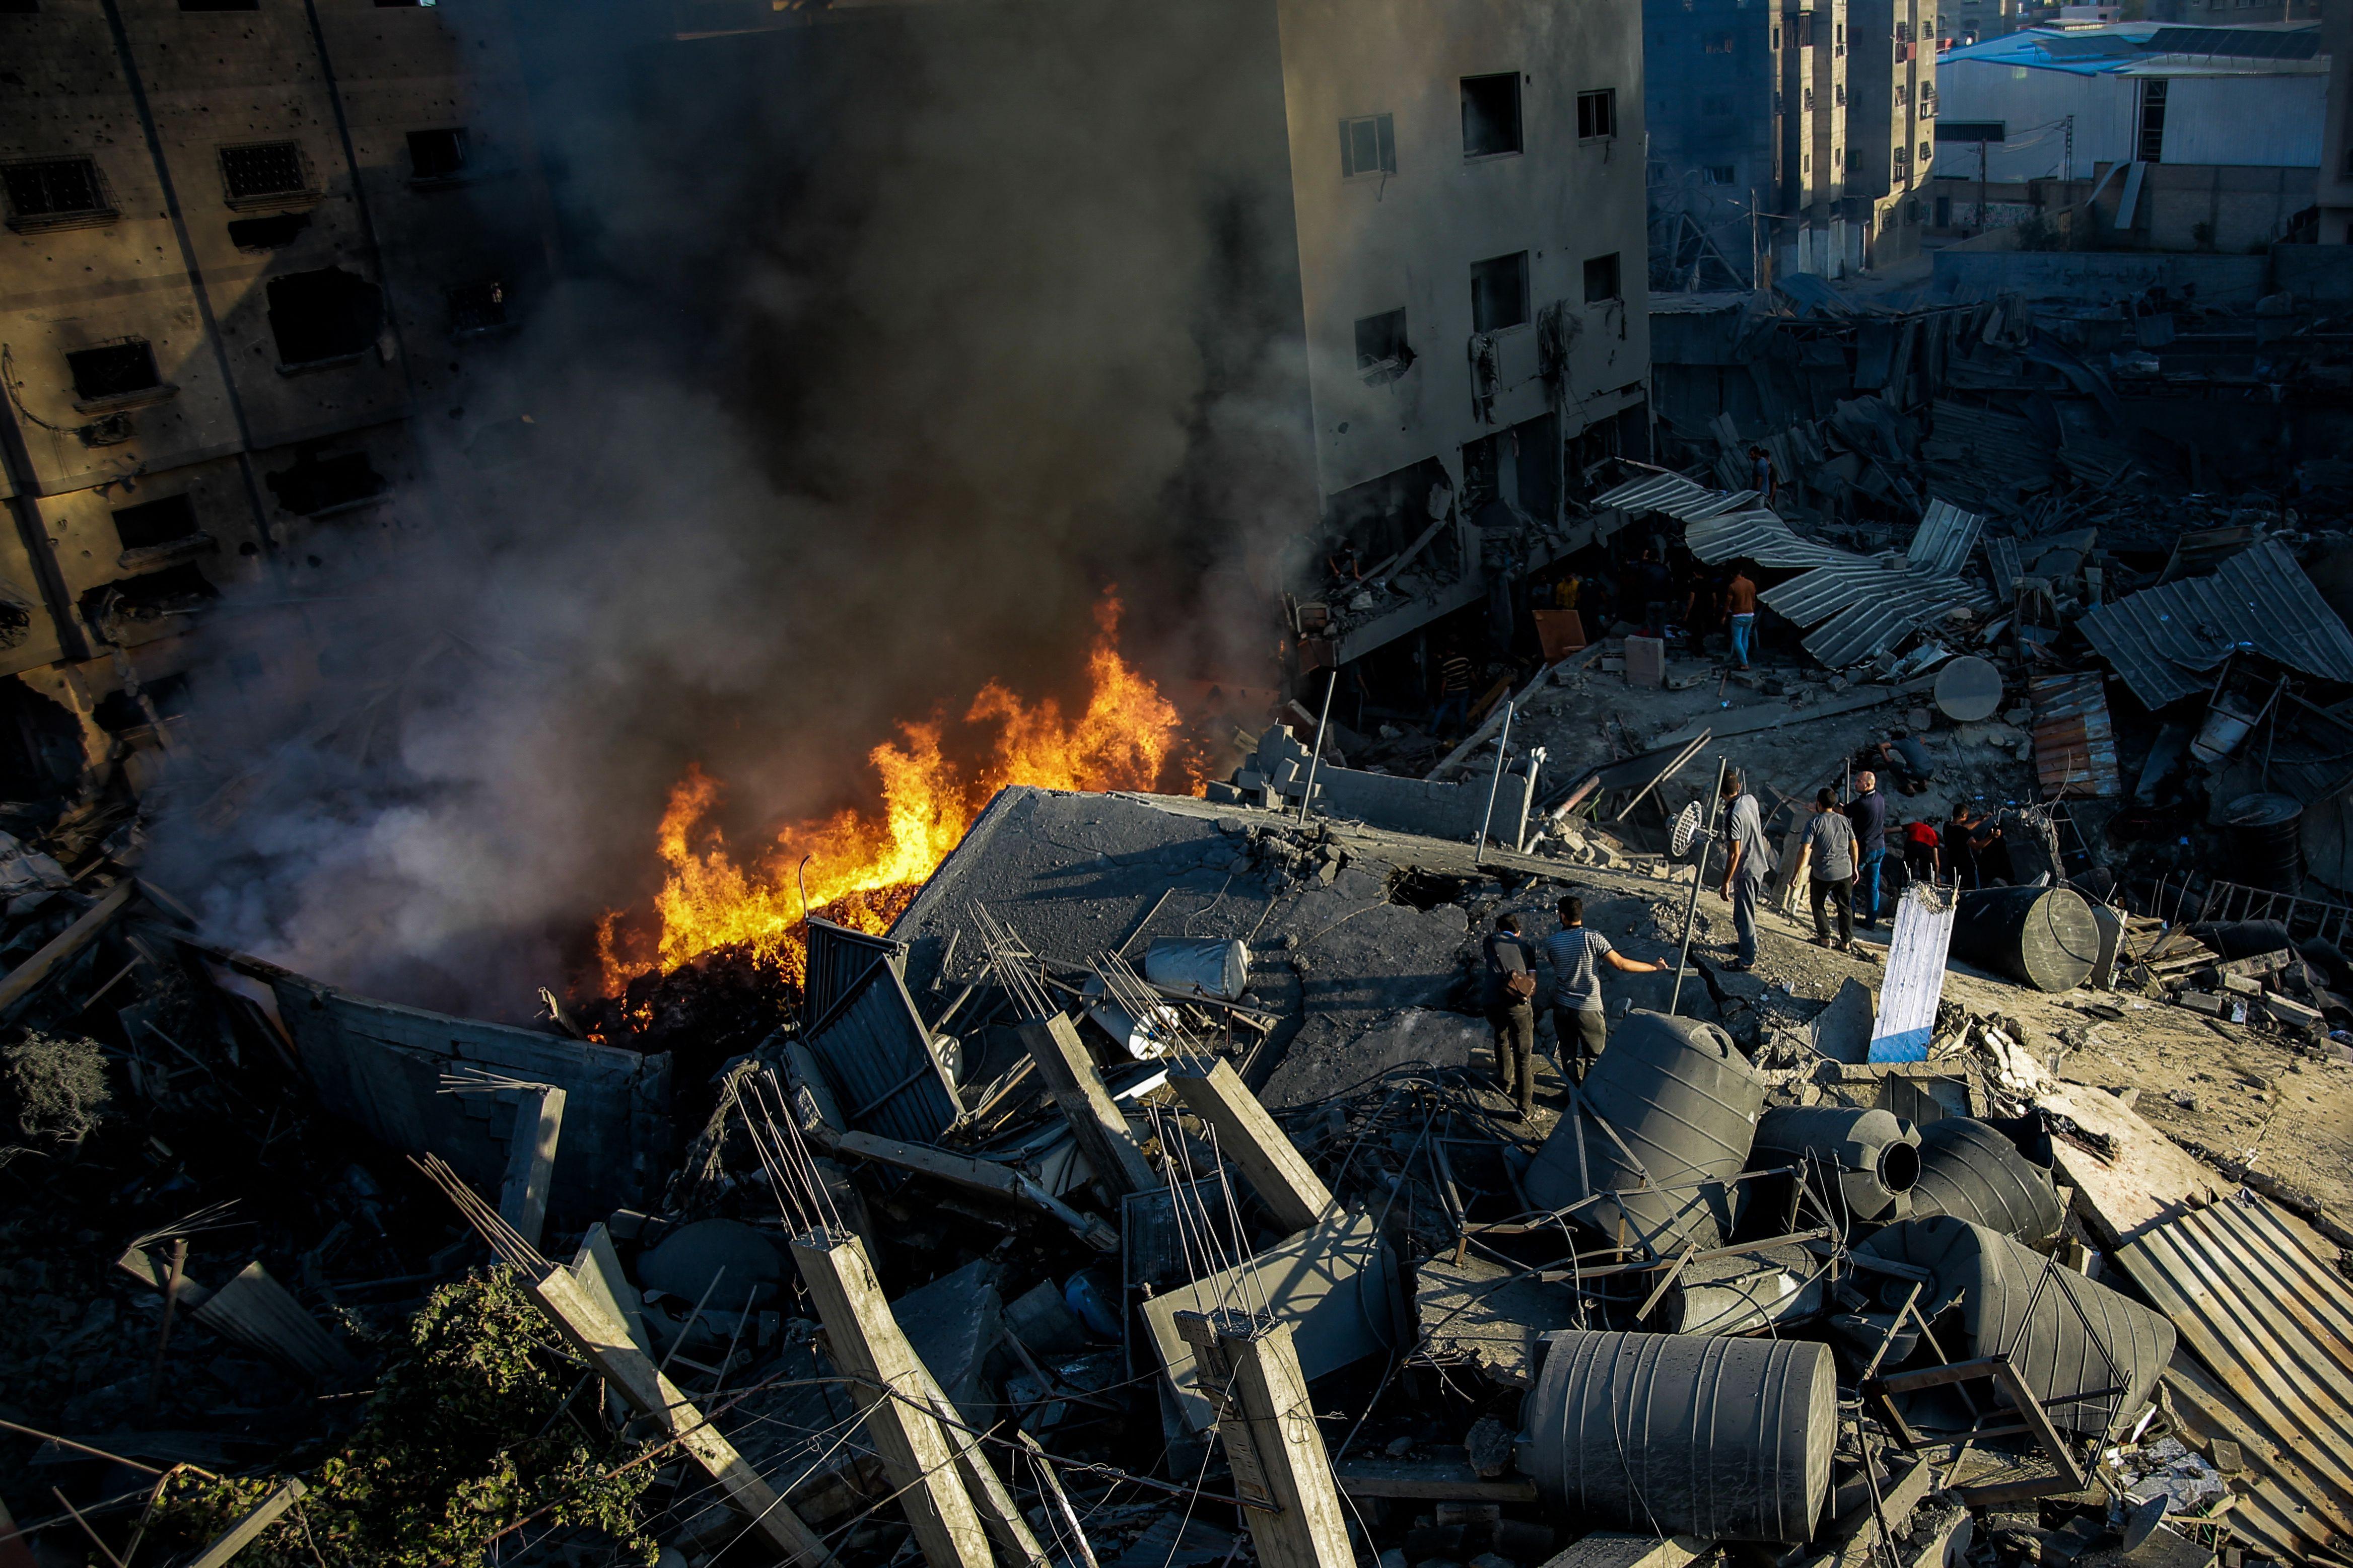 “From Tel Aviv collective punishment to Gaza”